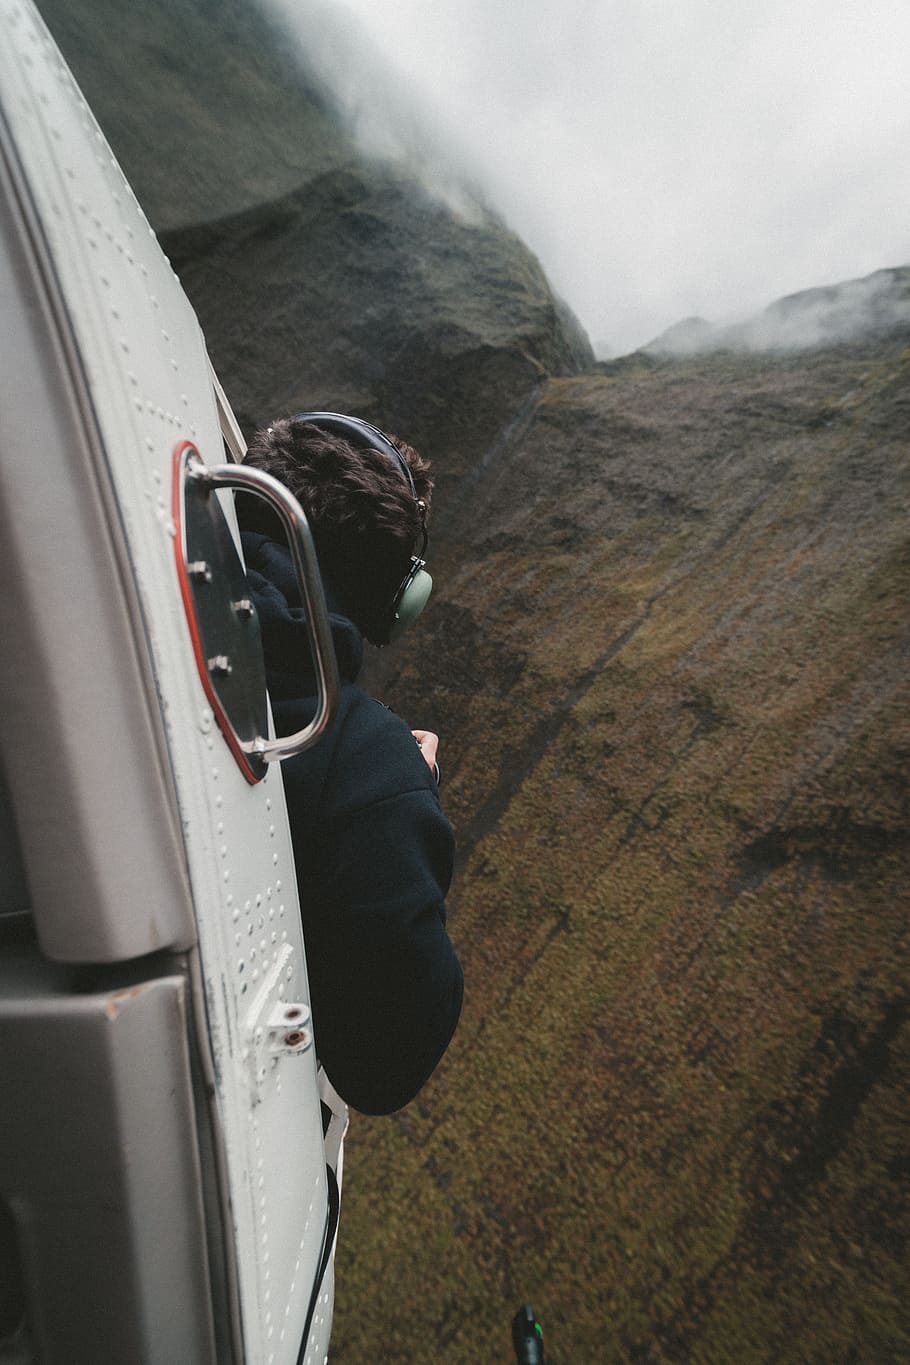 helicopter, aircraft, flight, travel, trip, clouds, mountain, fog, people, man